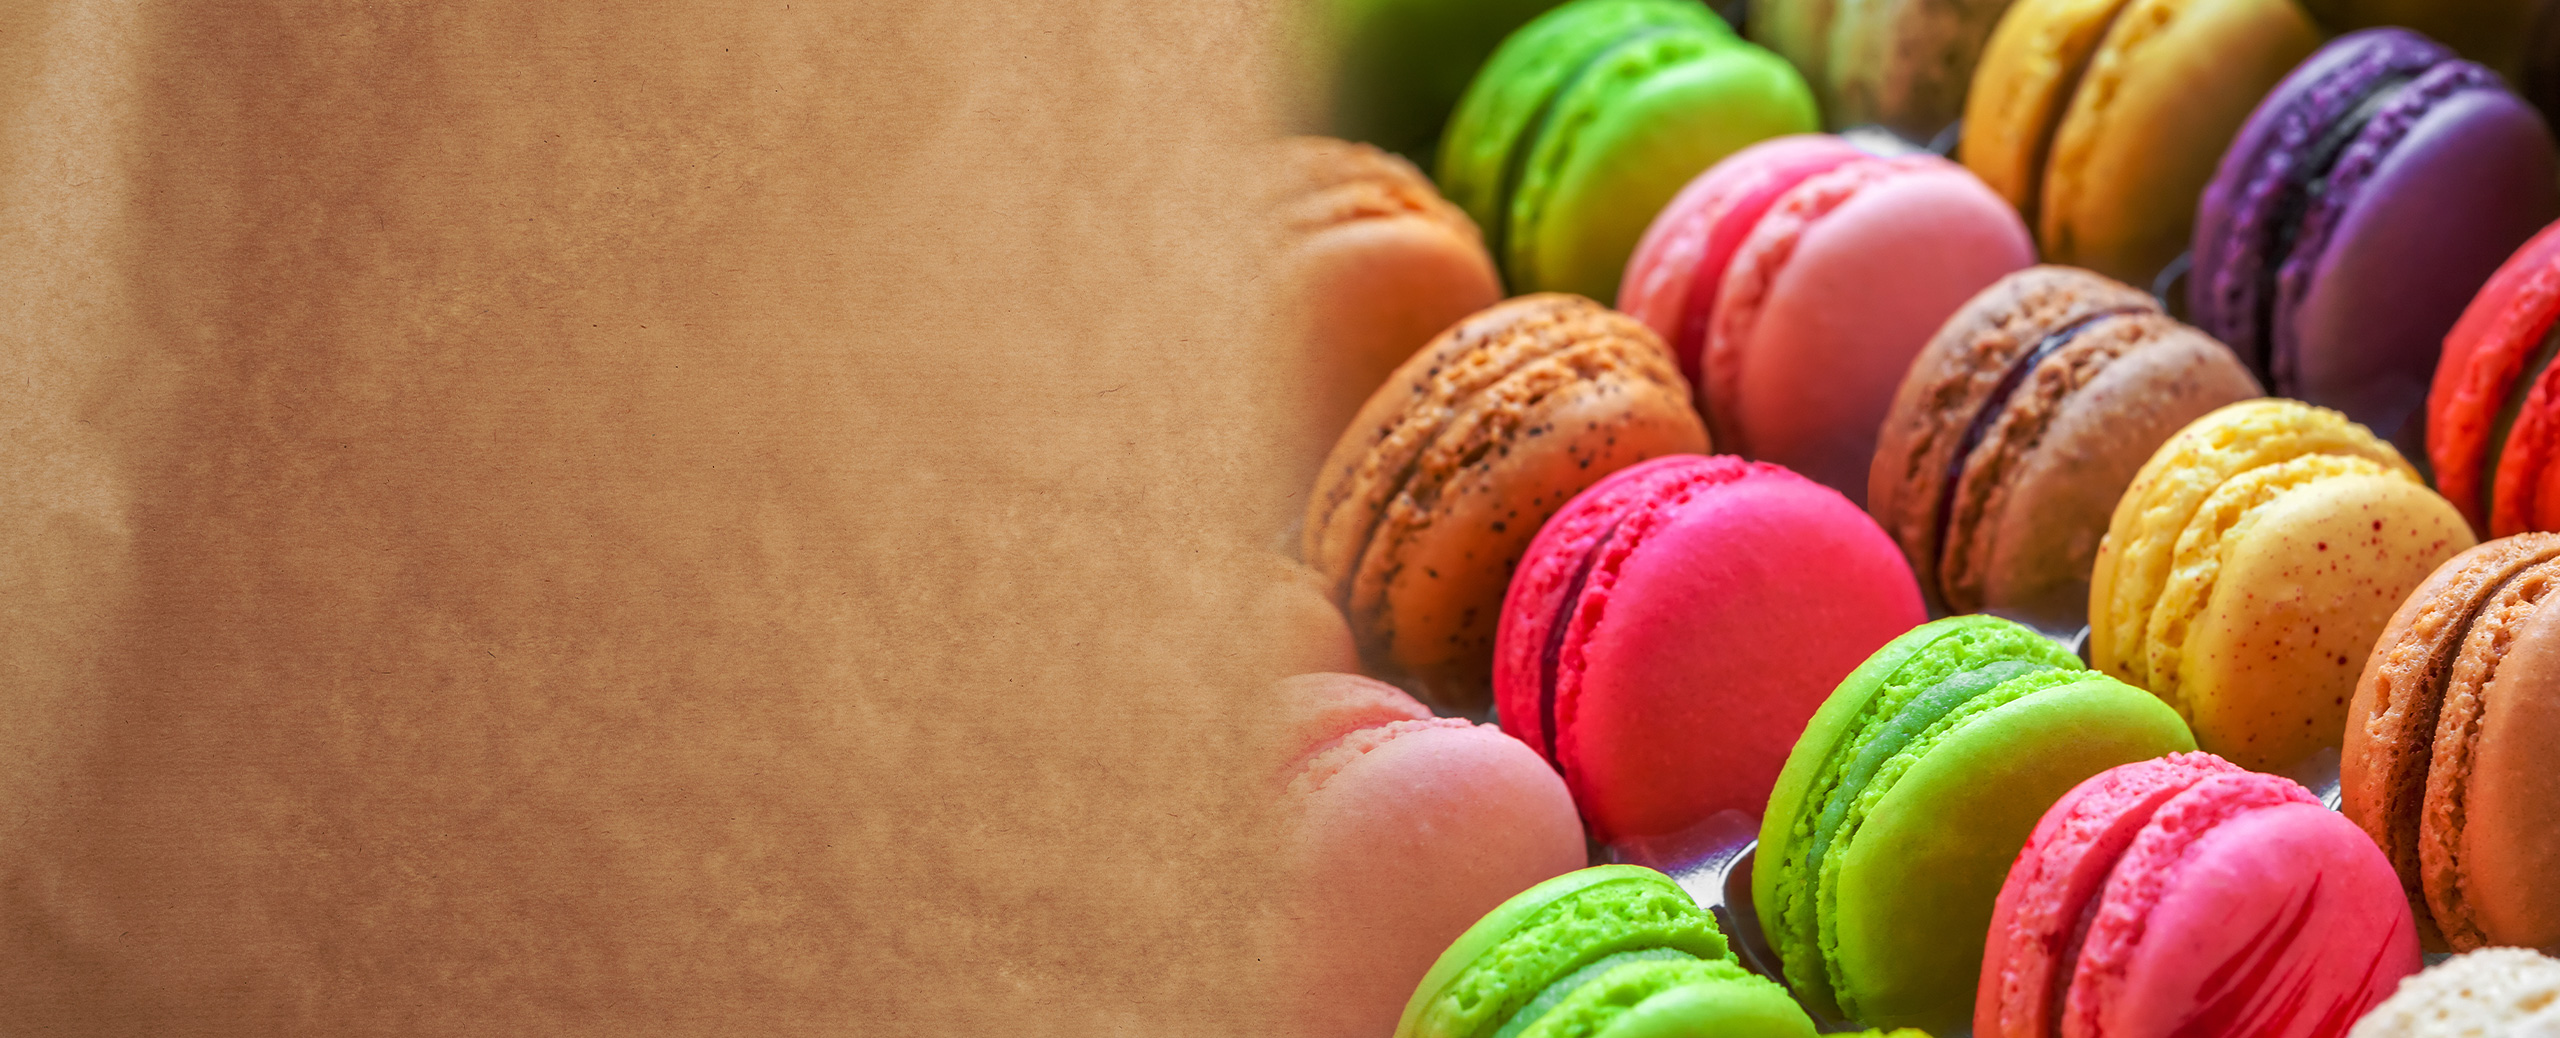 Bakery Ingredients Suppliers - Colours & Flavours